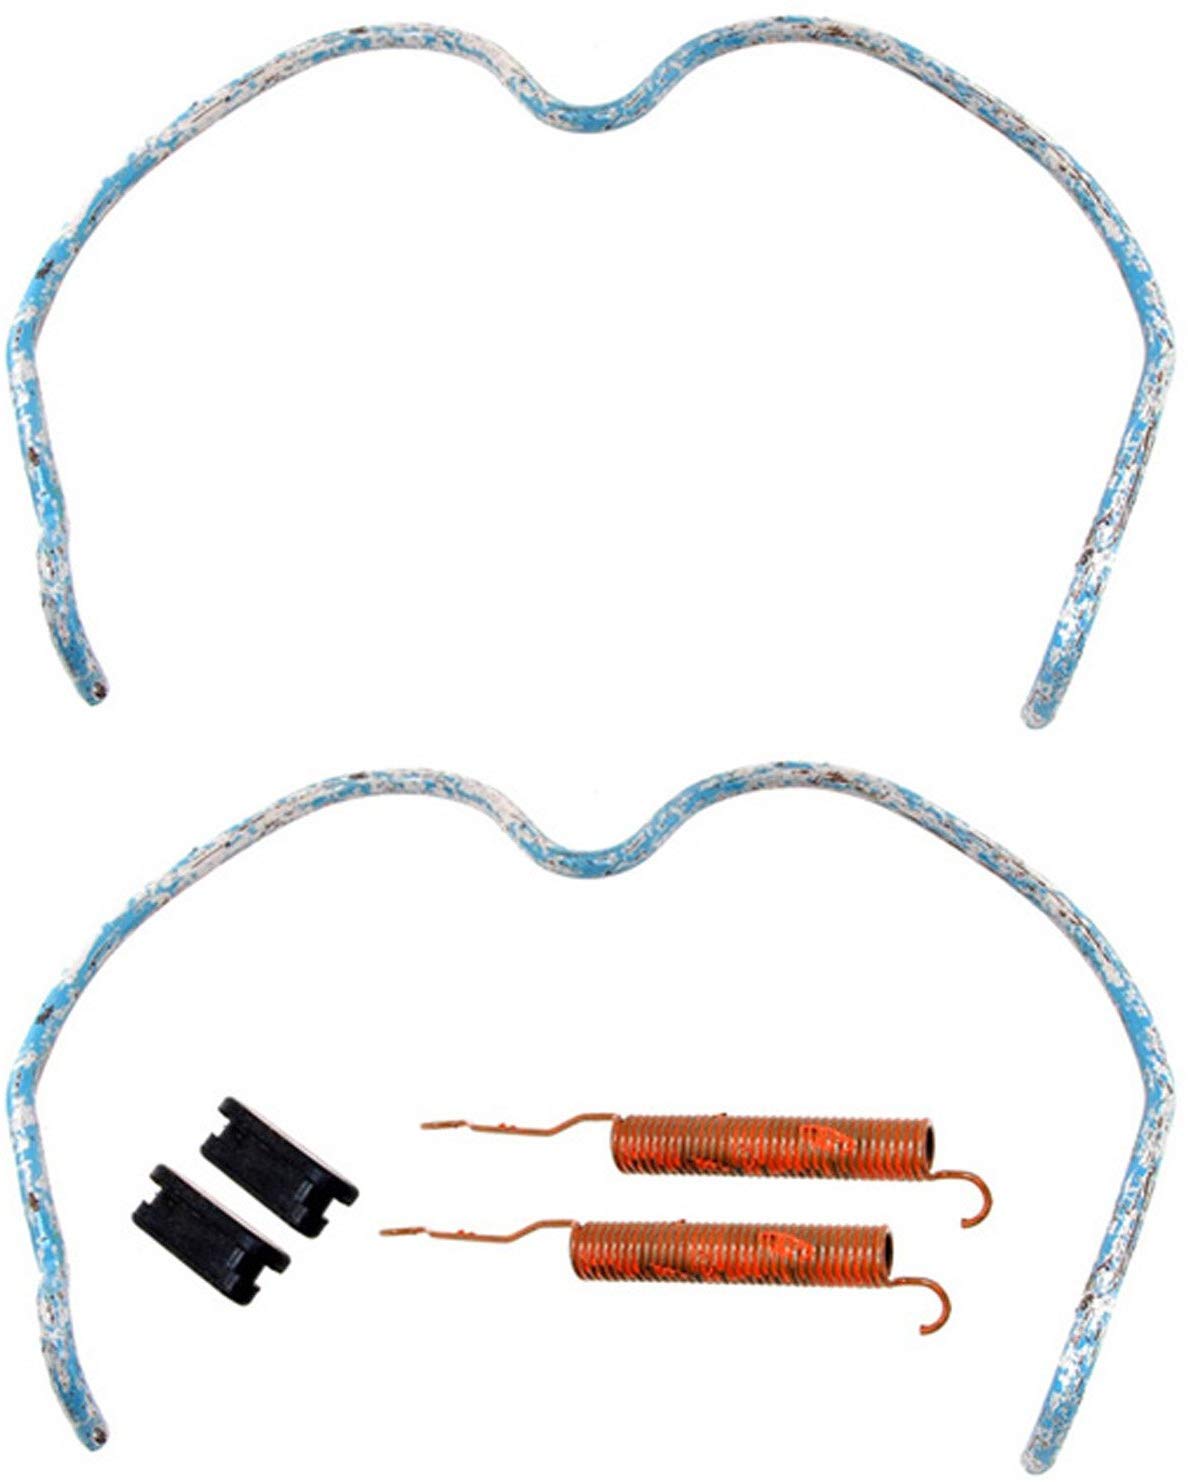 ACDelco 18K1147 Professional Rear Drum Brake Shoe Adjuster and Return Spring Kit with Springs and Caps